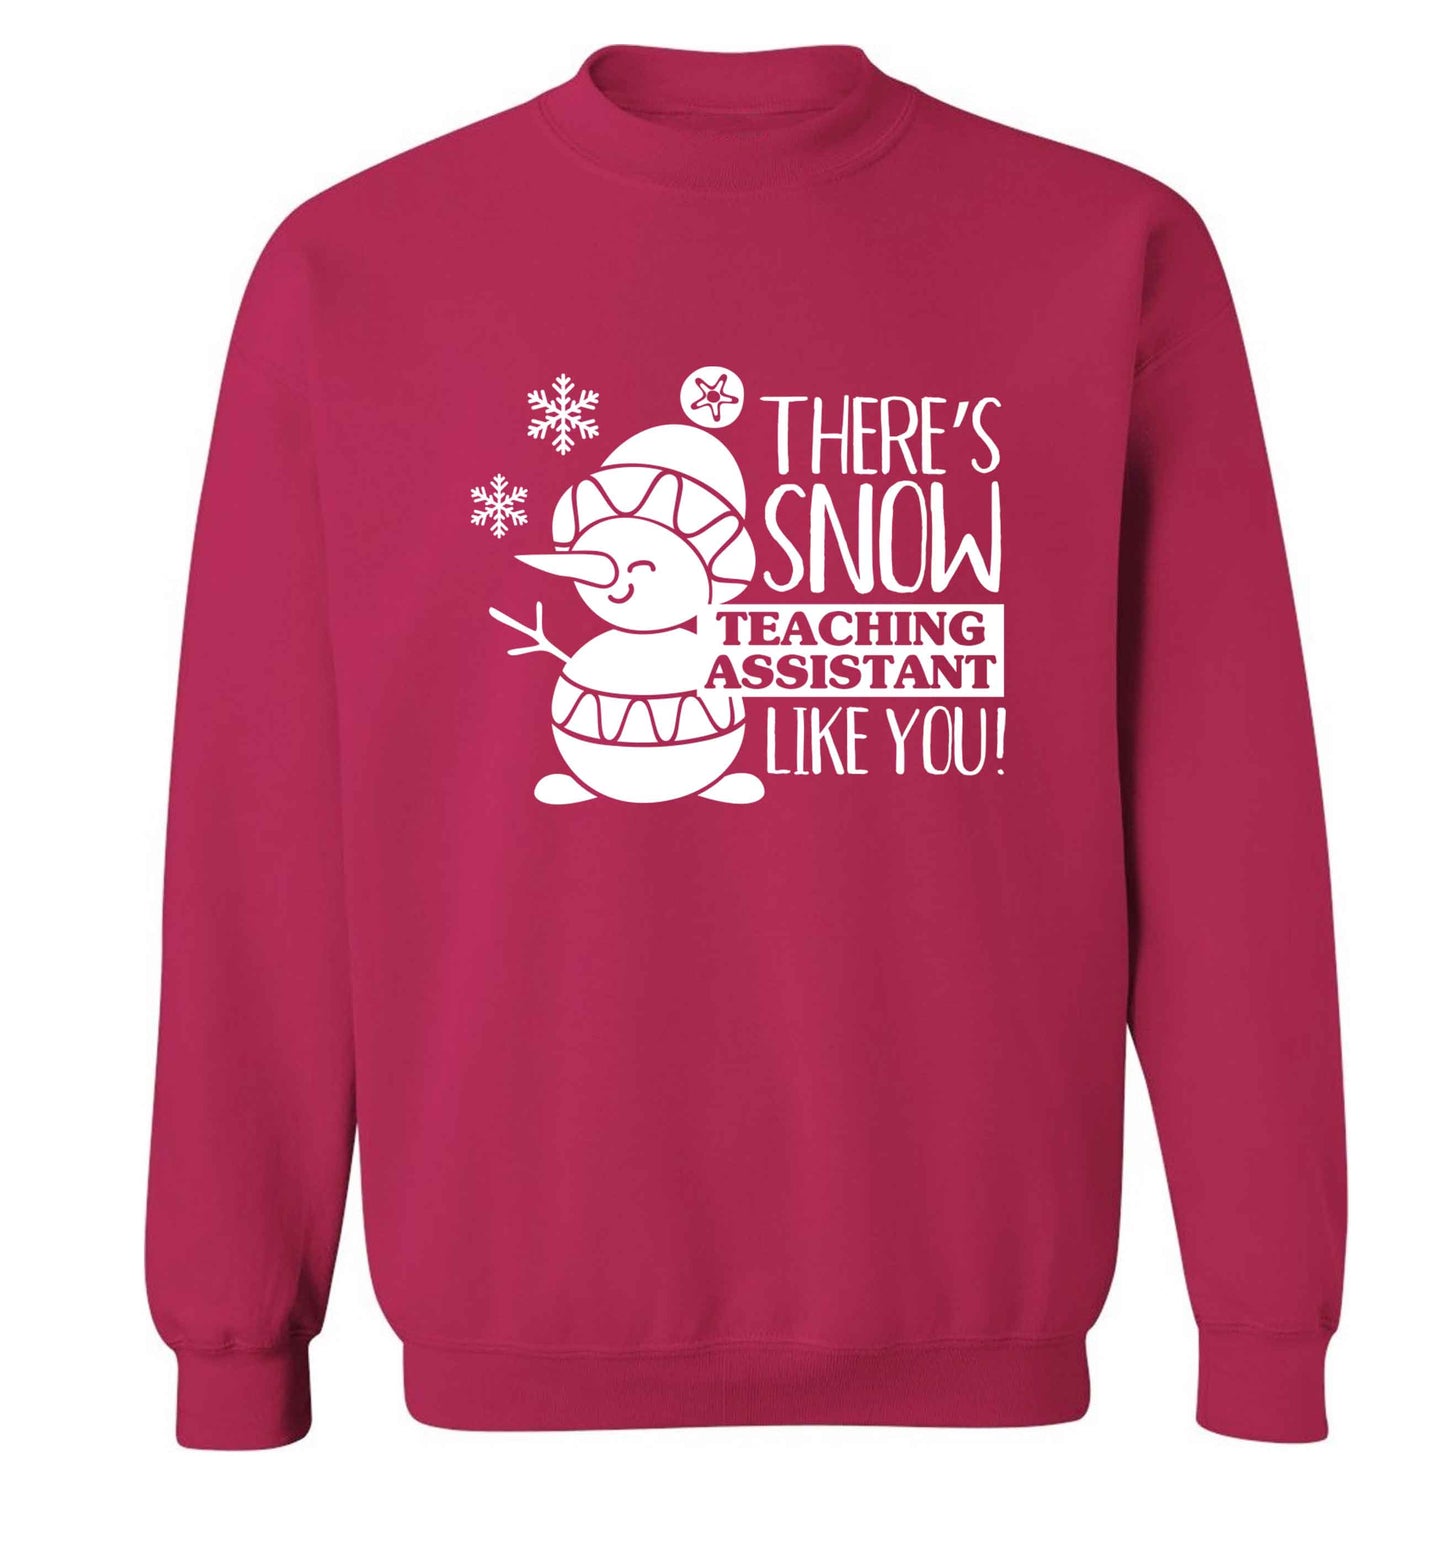 There's snow teaching assistant like you adult's unisex pink sweater 2XL